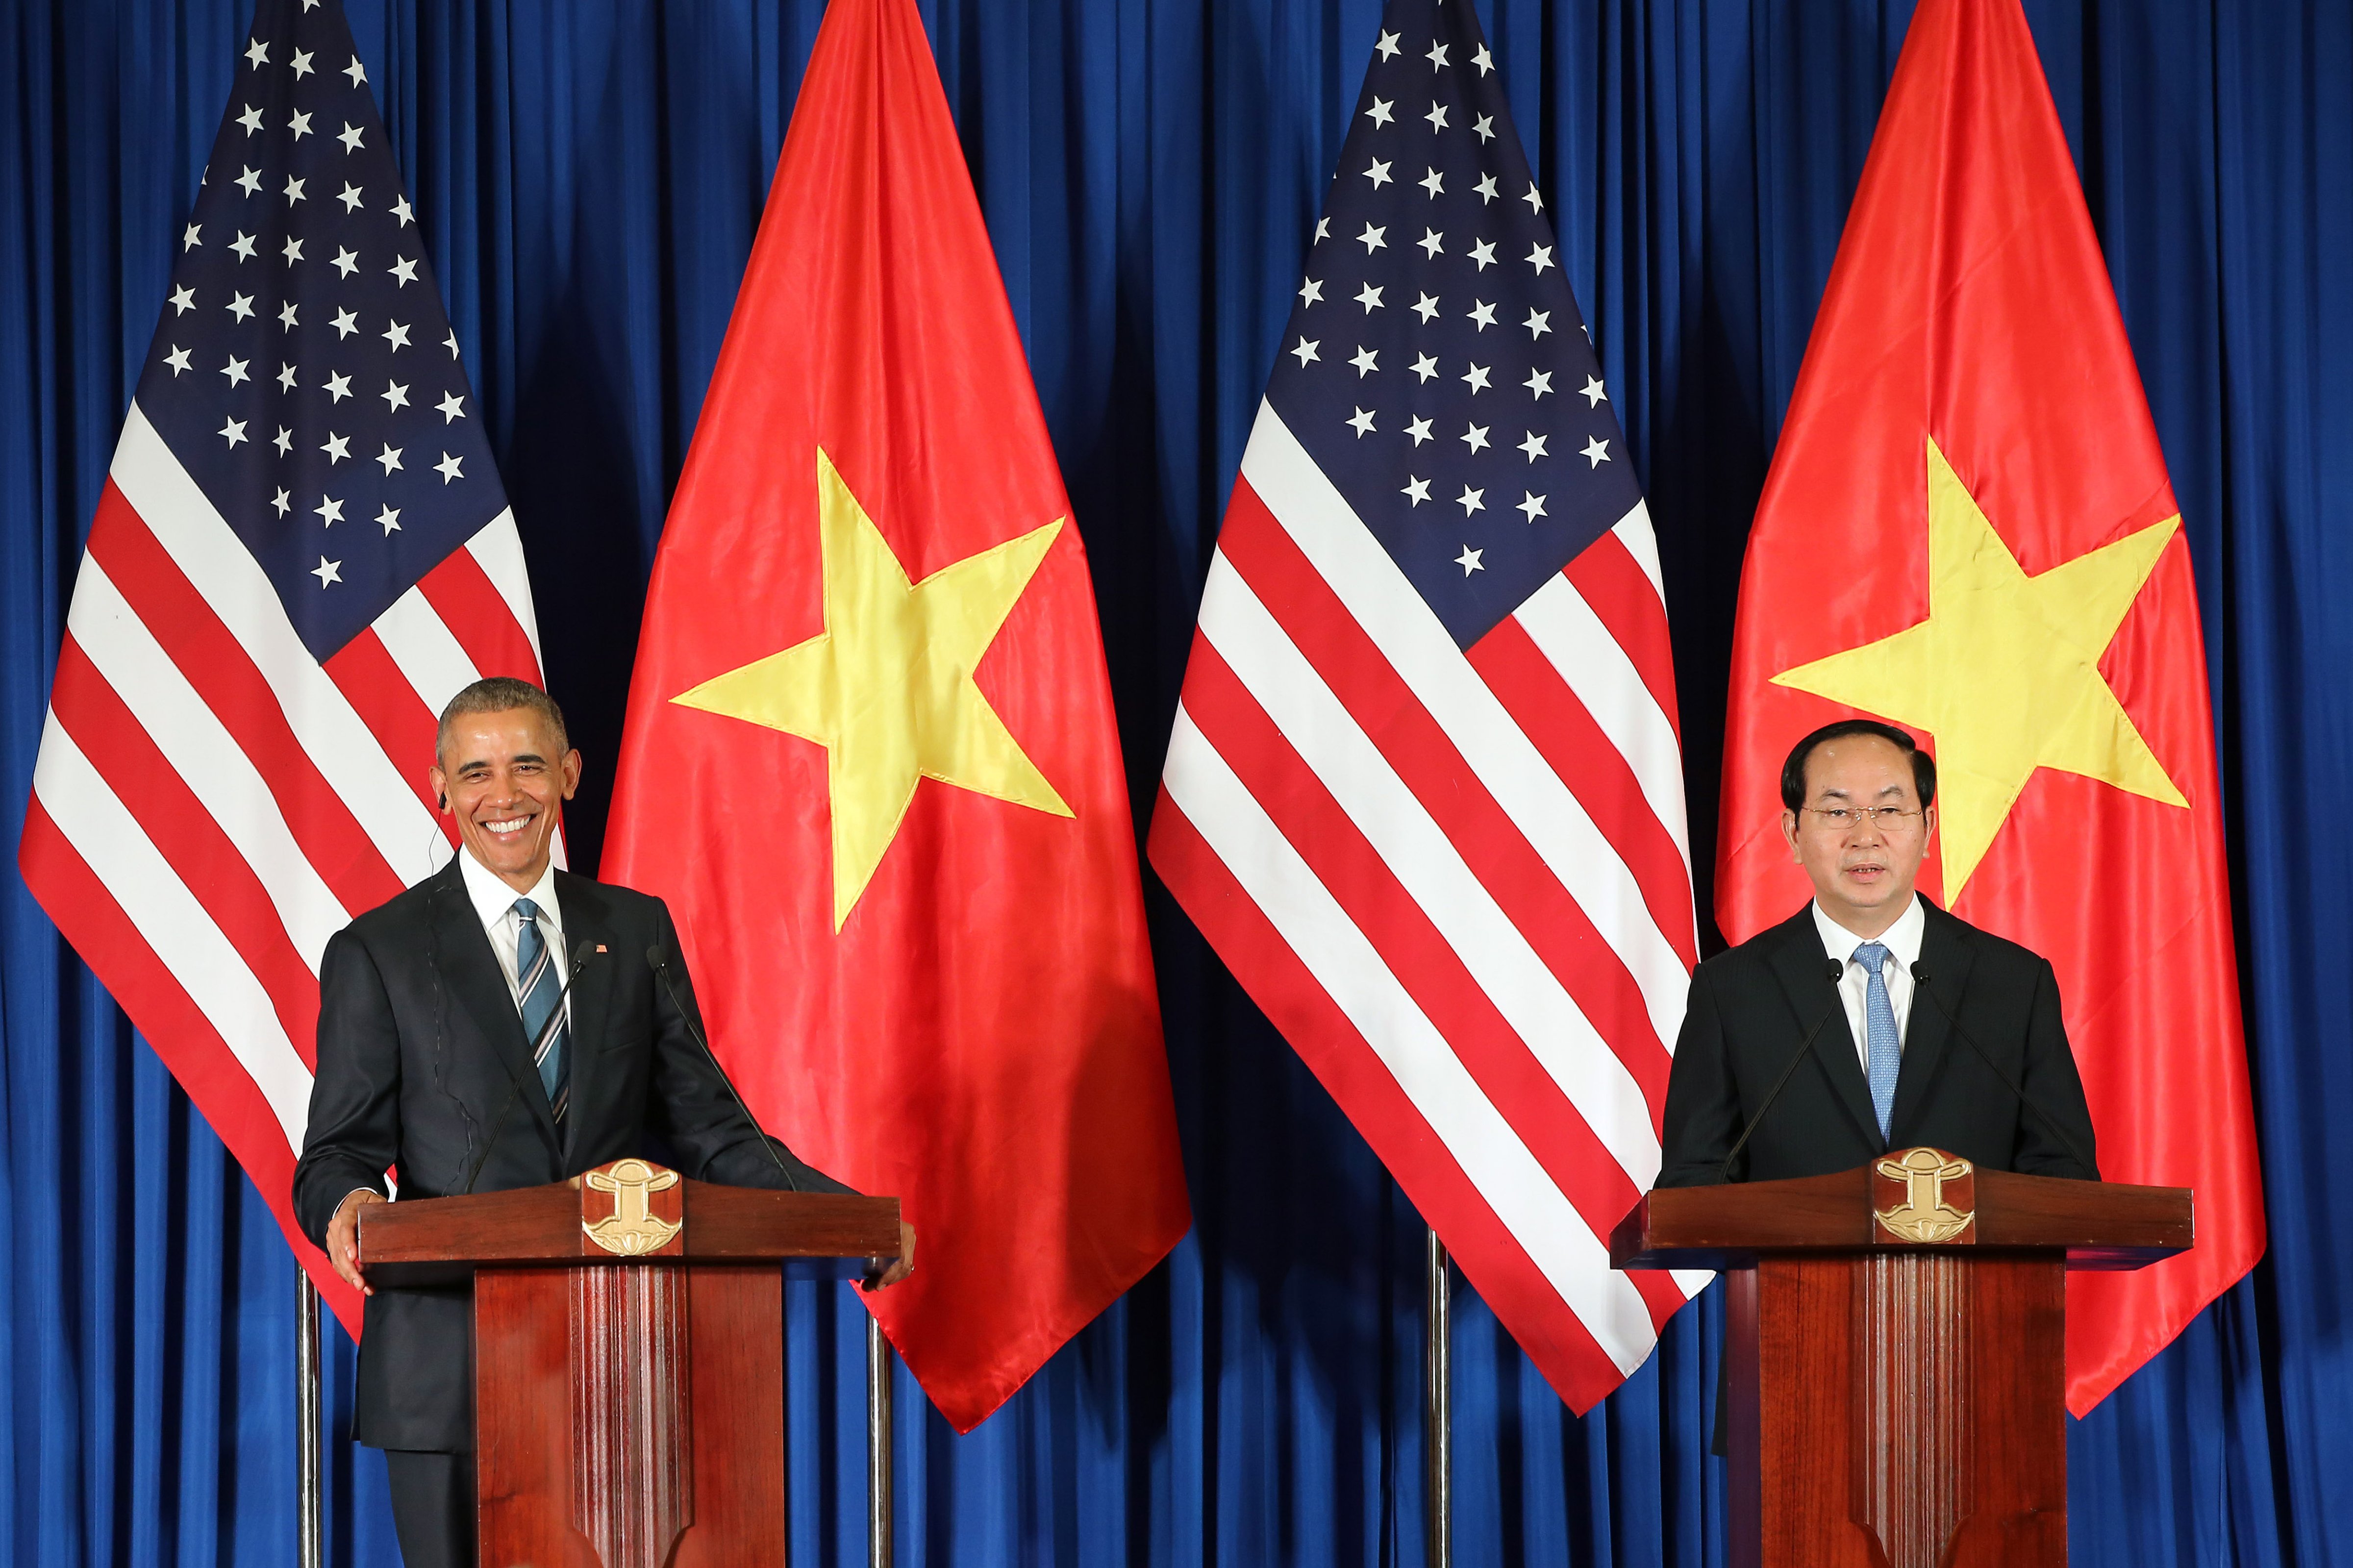 Vietnam's President Tran Dai Quang, right, and US President Barack Obama attend a press conference in Hanoi, Vietnam, May 23, 2016. (Luong Thai Linh—Pool/AP)